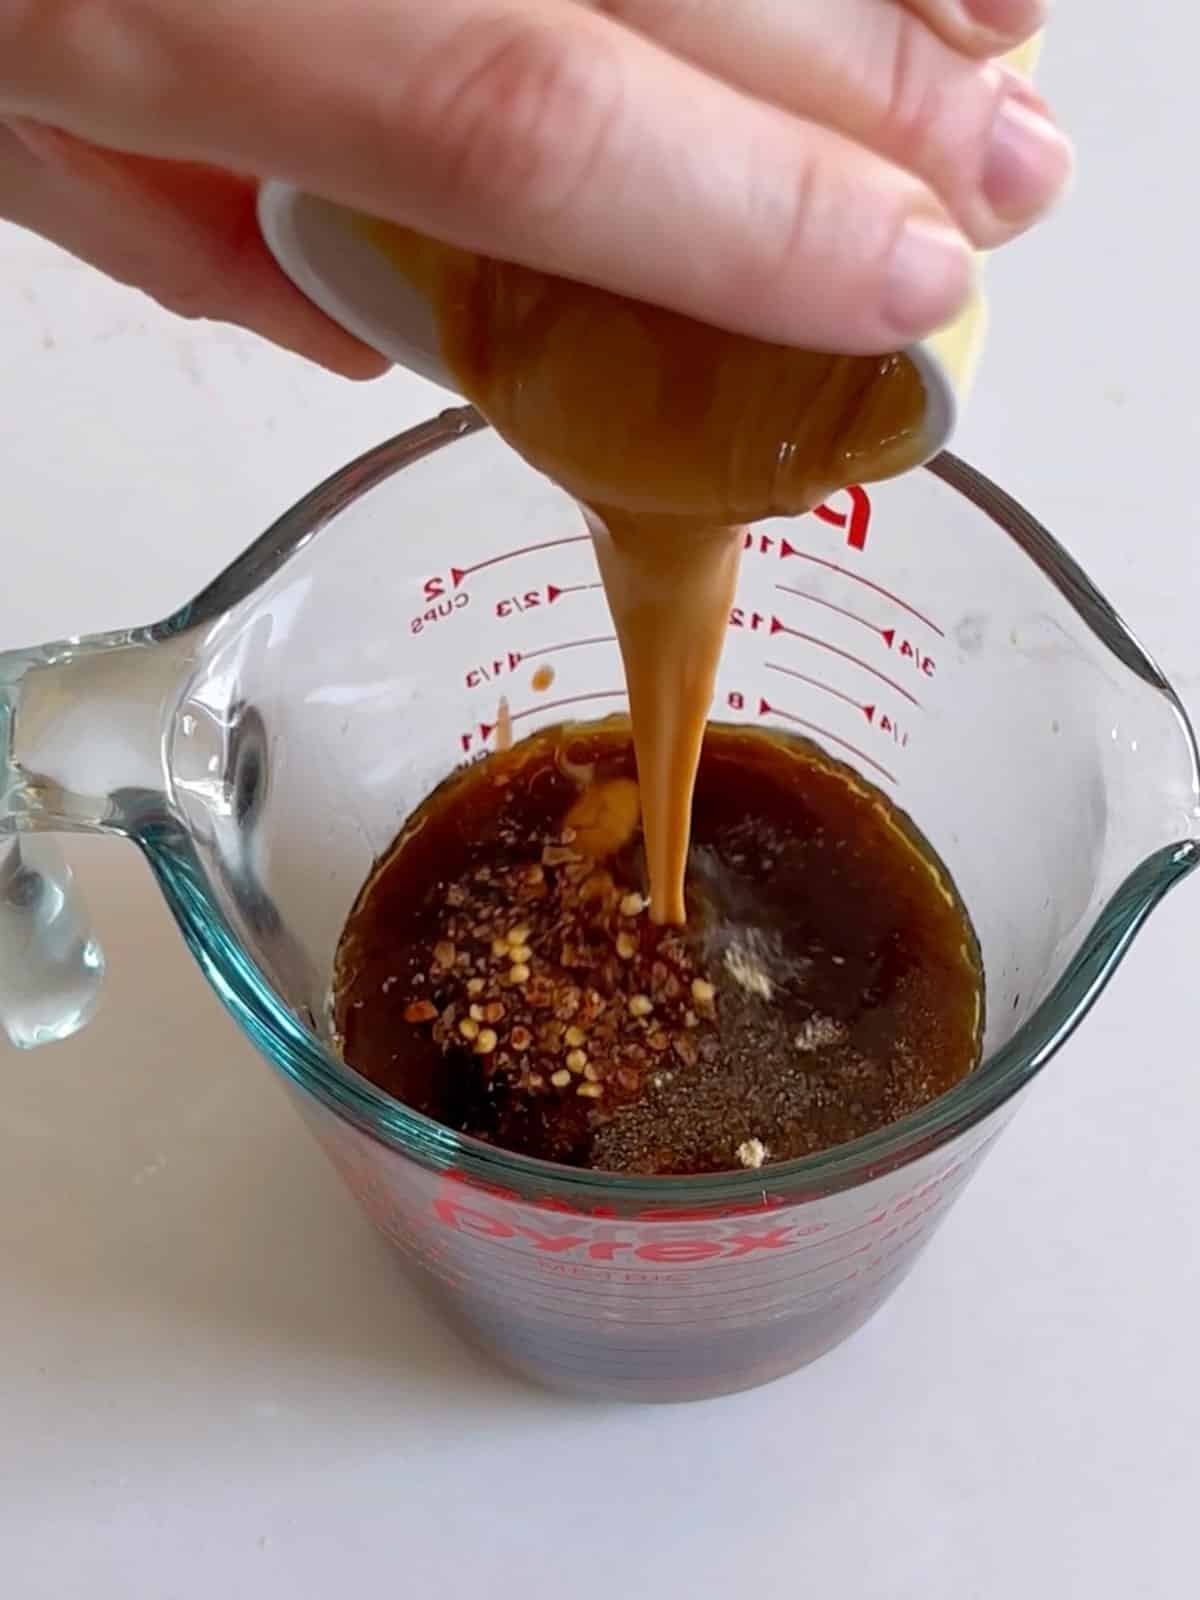 Peanut sauce ingredients in a large measuring cup with peanut butter being poured in.